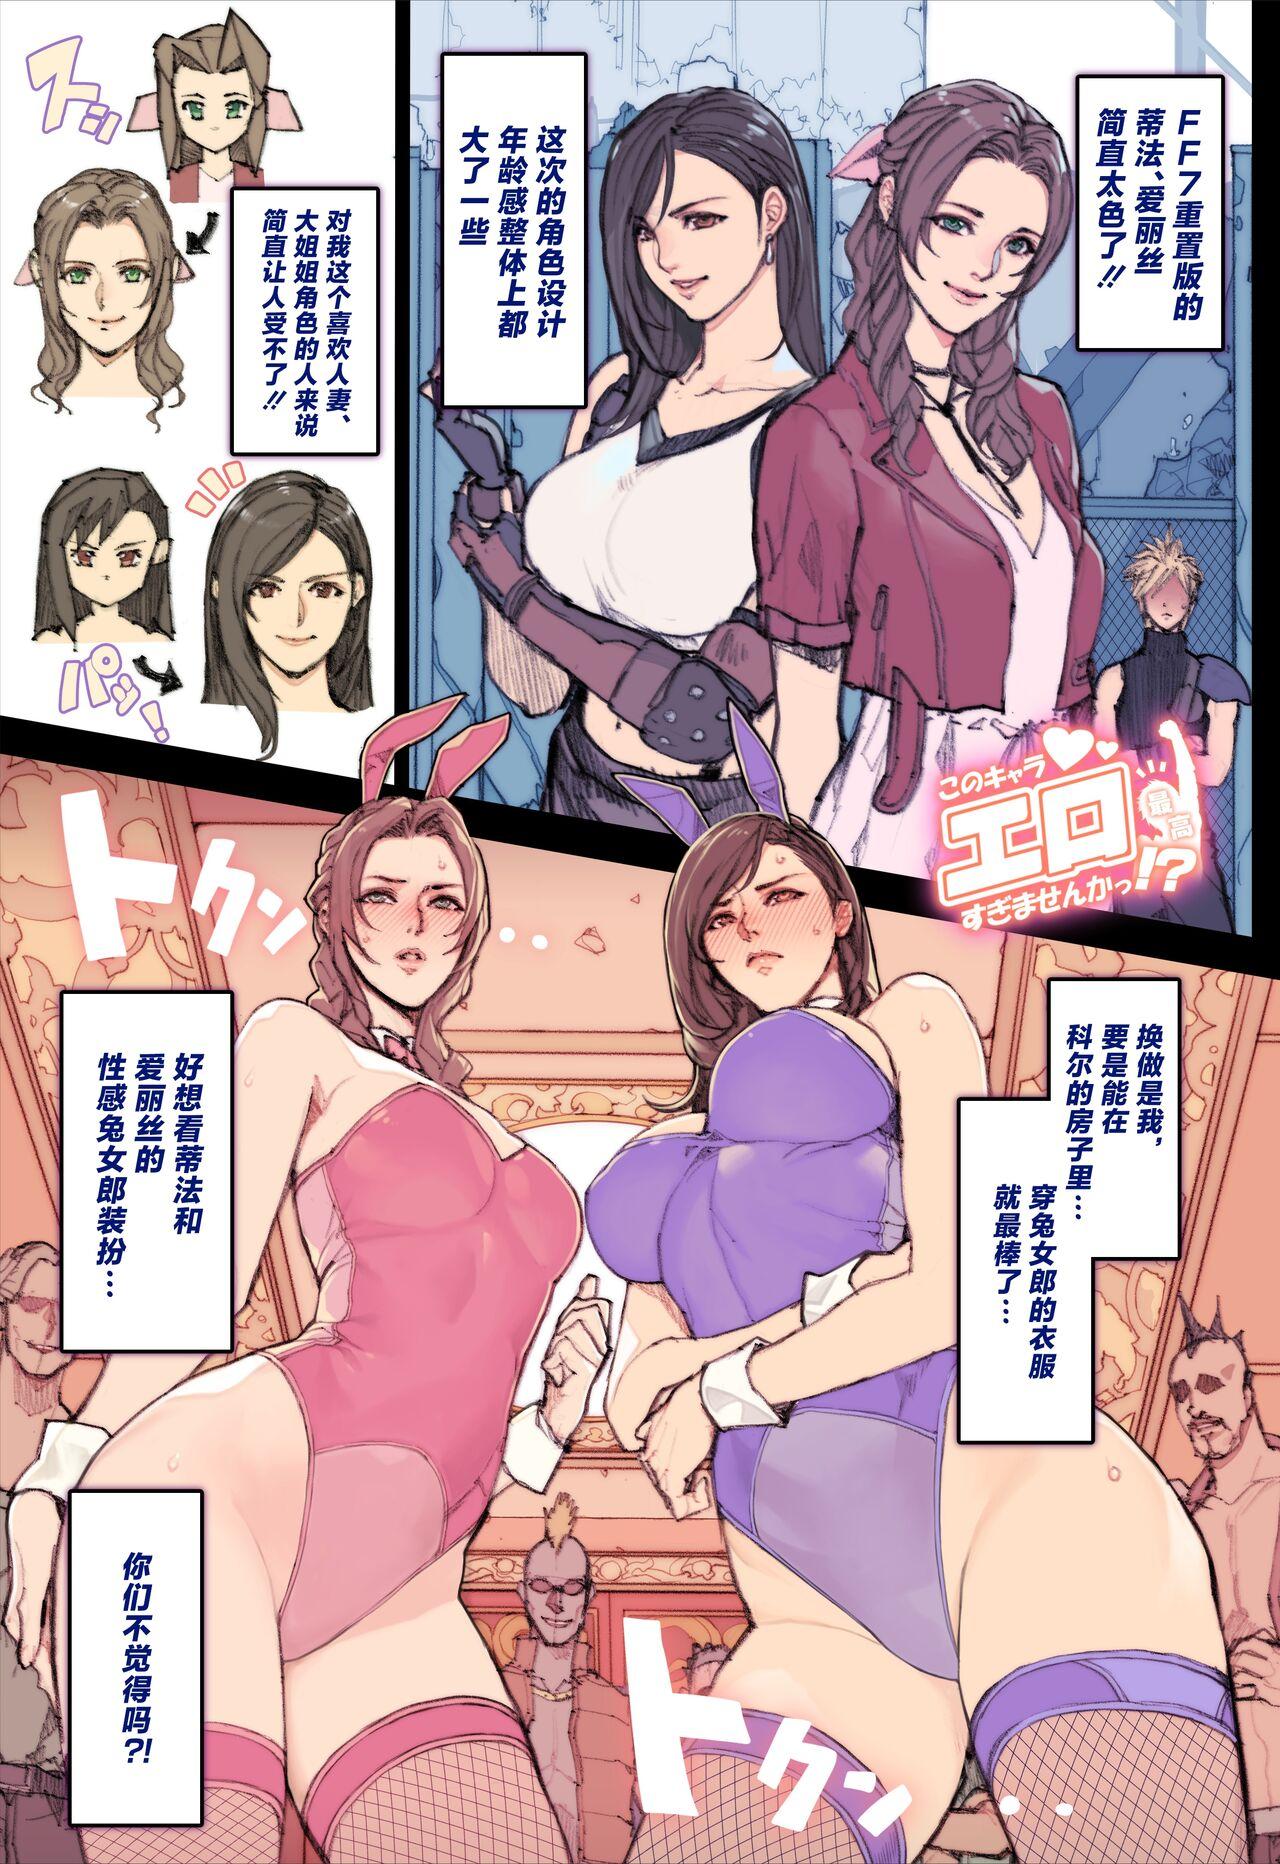 Play FF7R妄想落書き！ Amateur - Picture 2